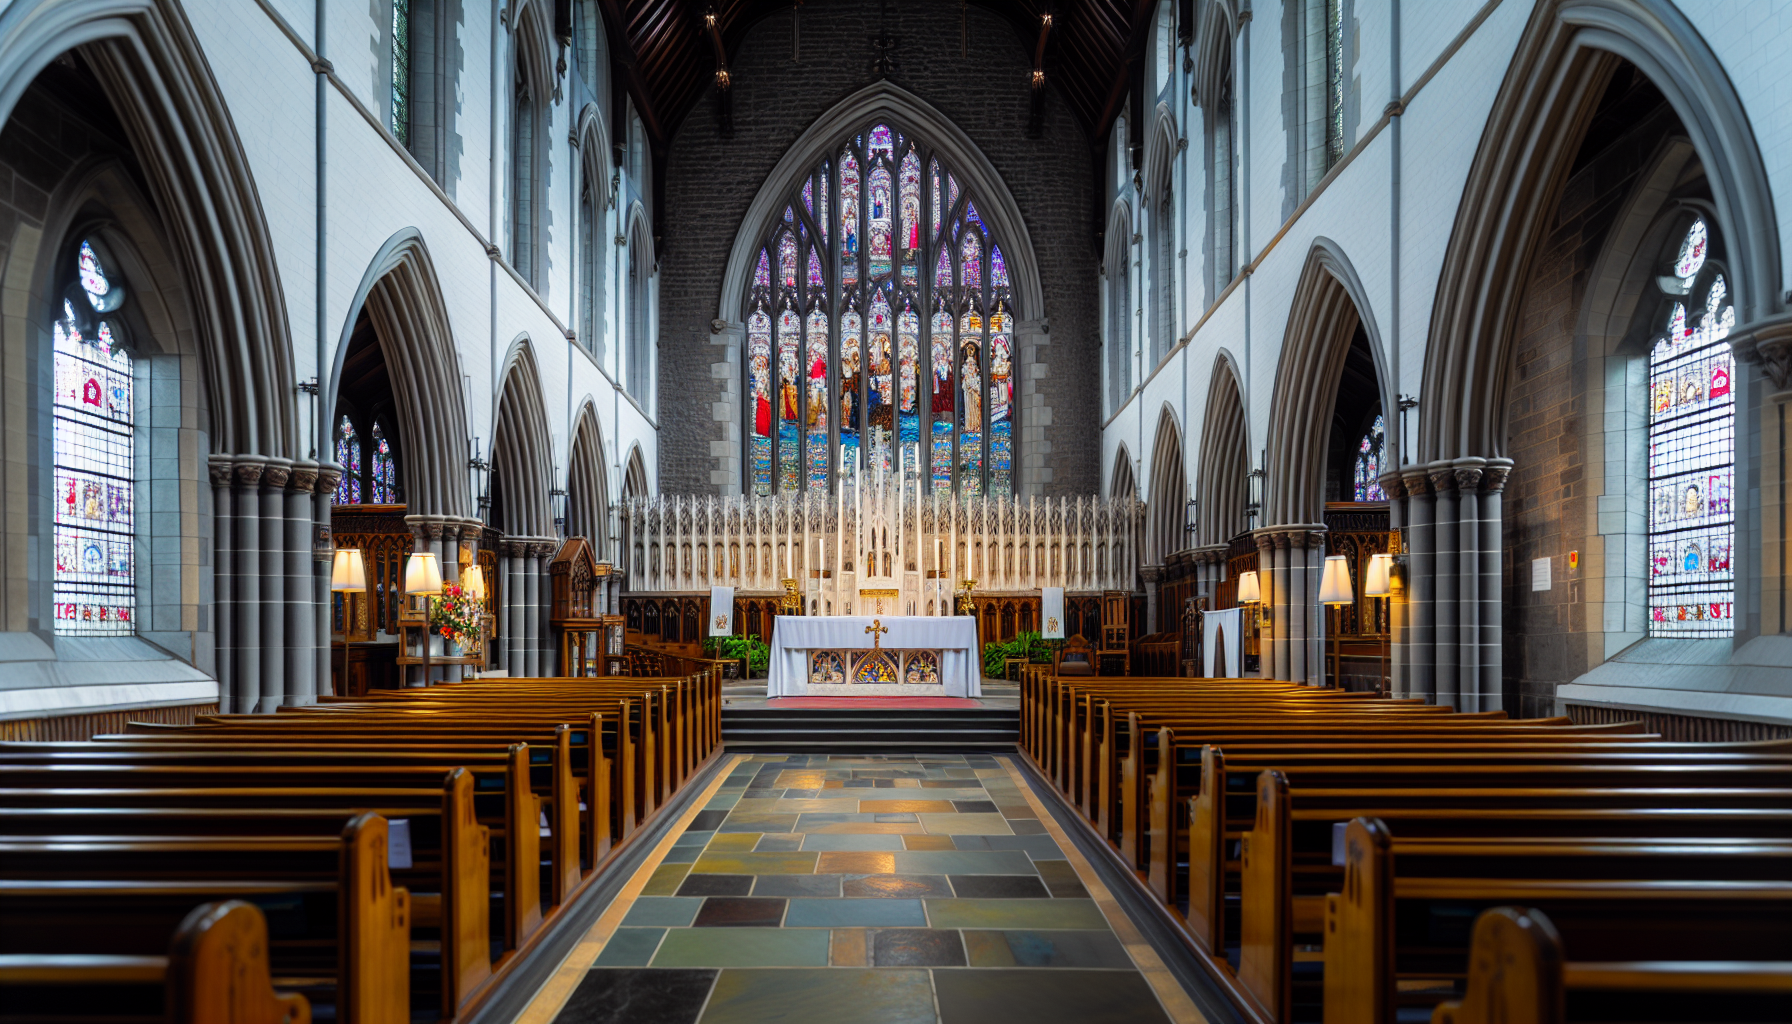 Anglican church interior with stained glass windows and altar